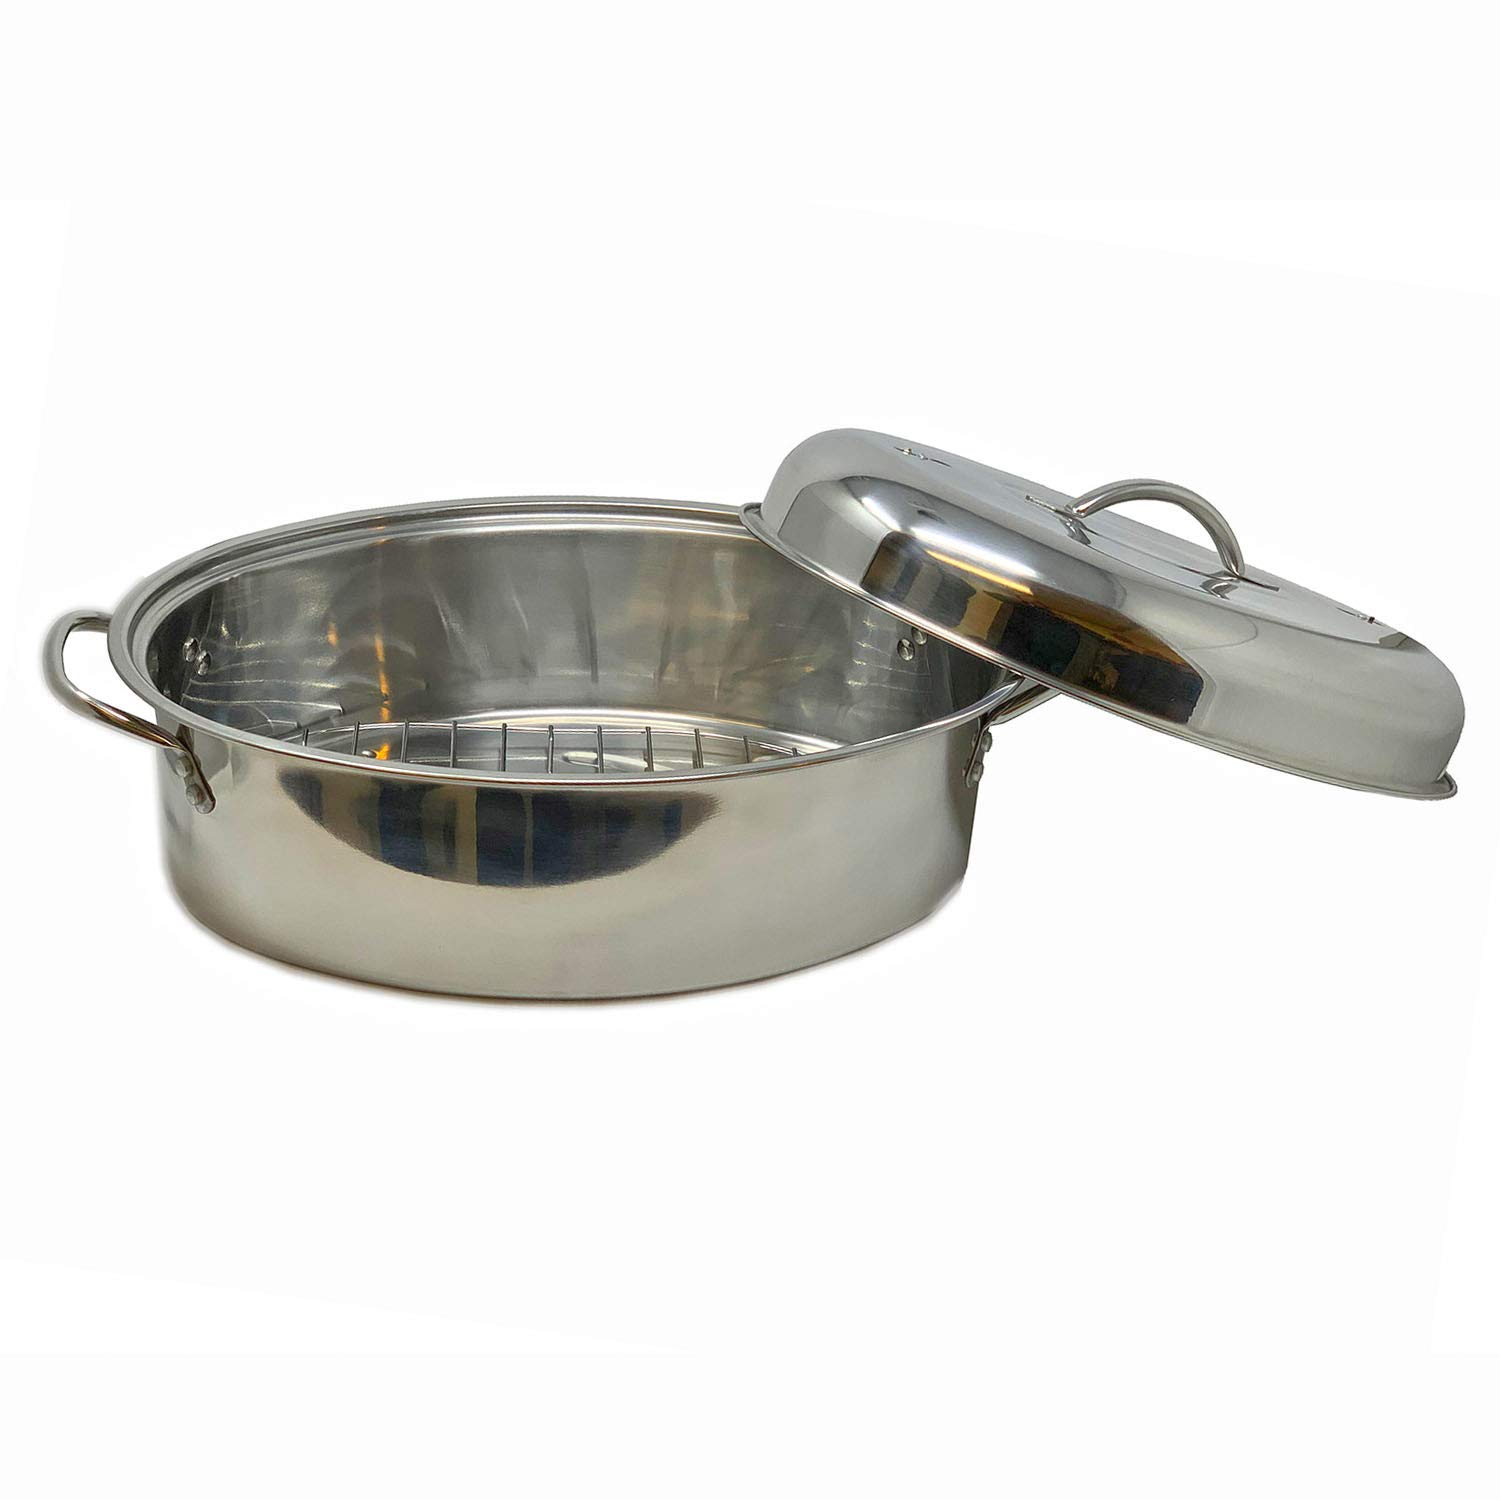 Stainless Steel Oval Lidded Roaster Pan Extra Large & Lightweight With Lid & Wire Rack | Multi-Purpose Oven Cookware High Dome | Meat Joints Chicken Vegetables 9.5 Quart Capacity